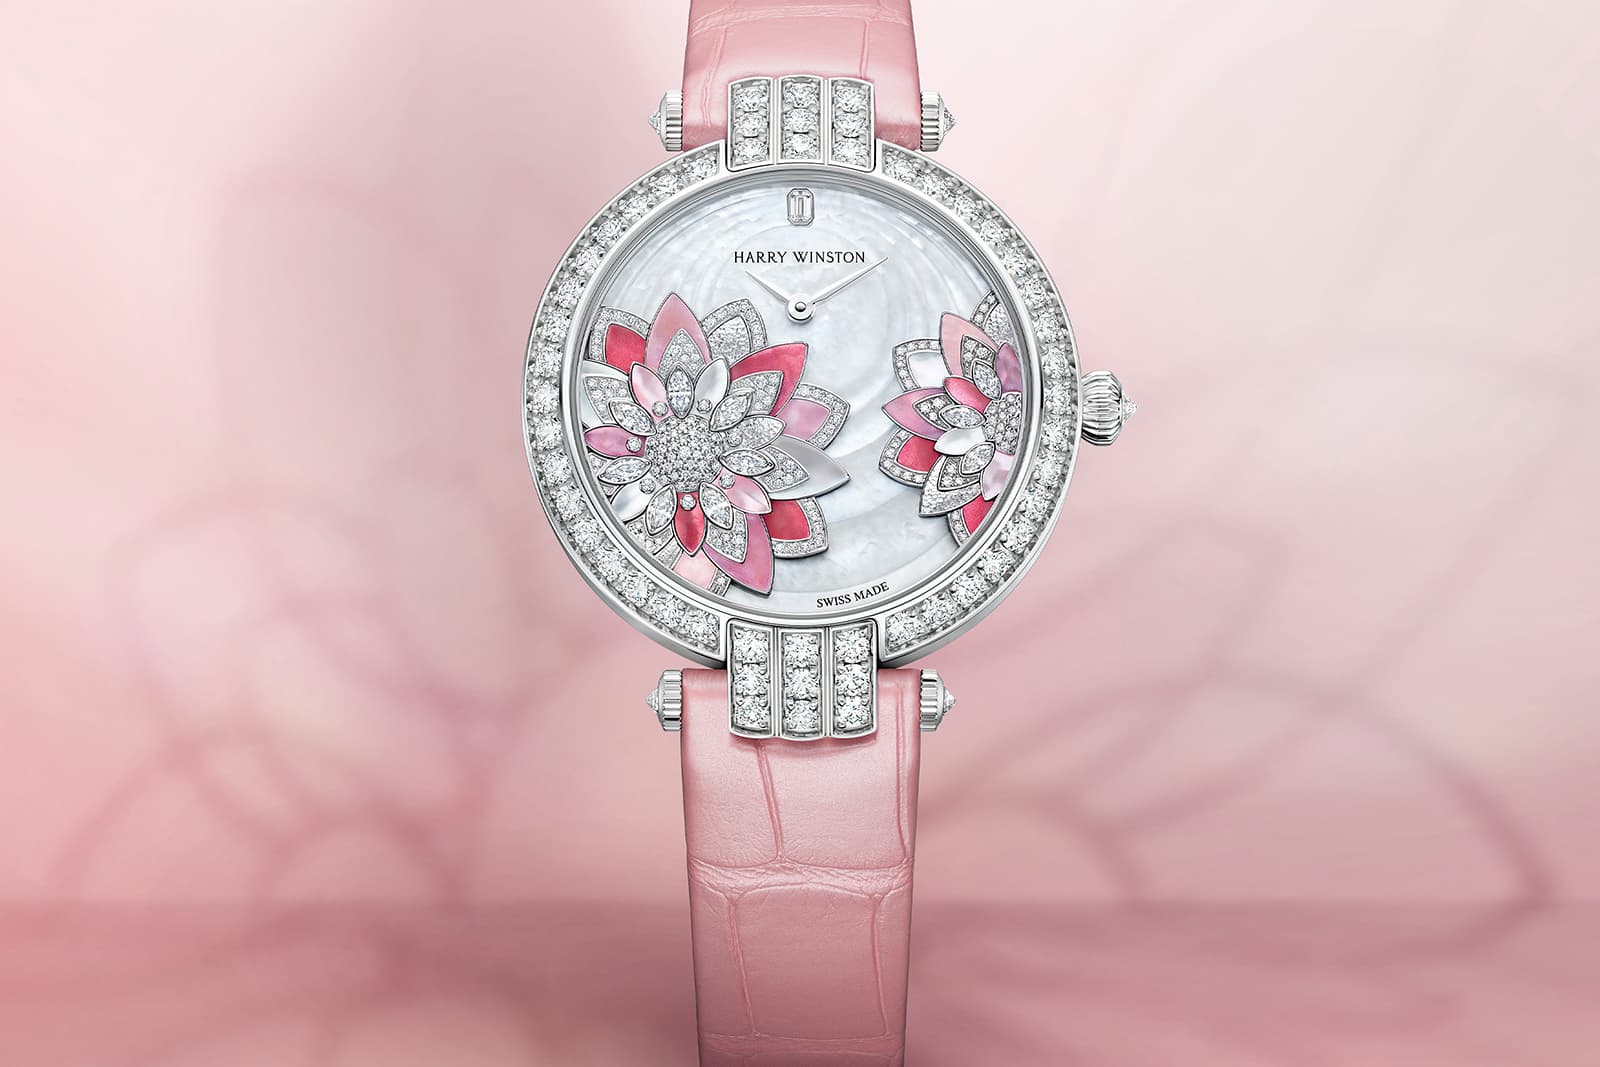 The new Harry Winston Premier Lotus Automatic 36mm watch featuring mother of pearl and diamonds, set to form the delicate lotus flower